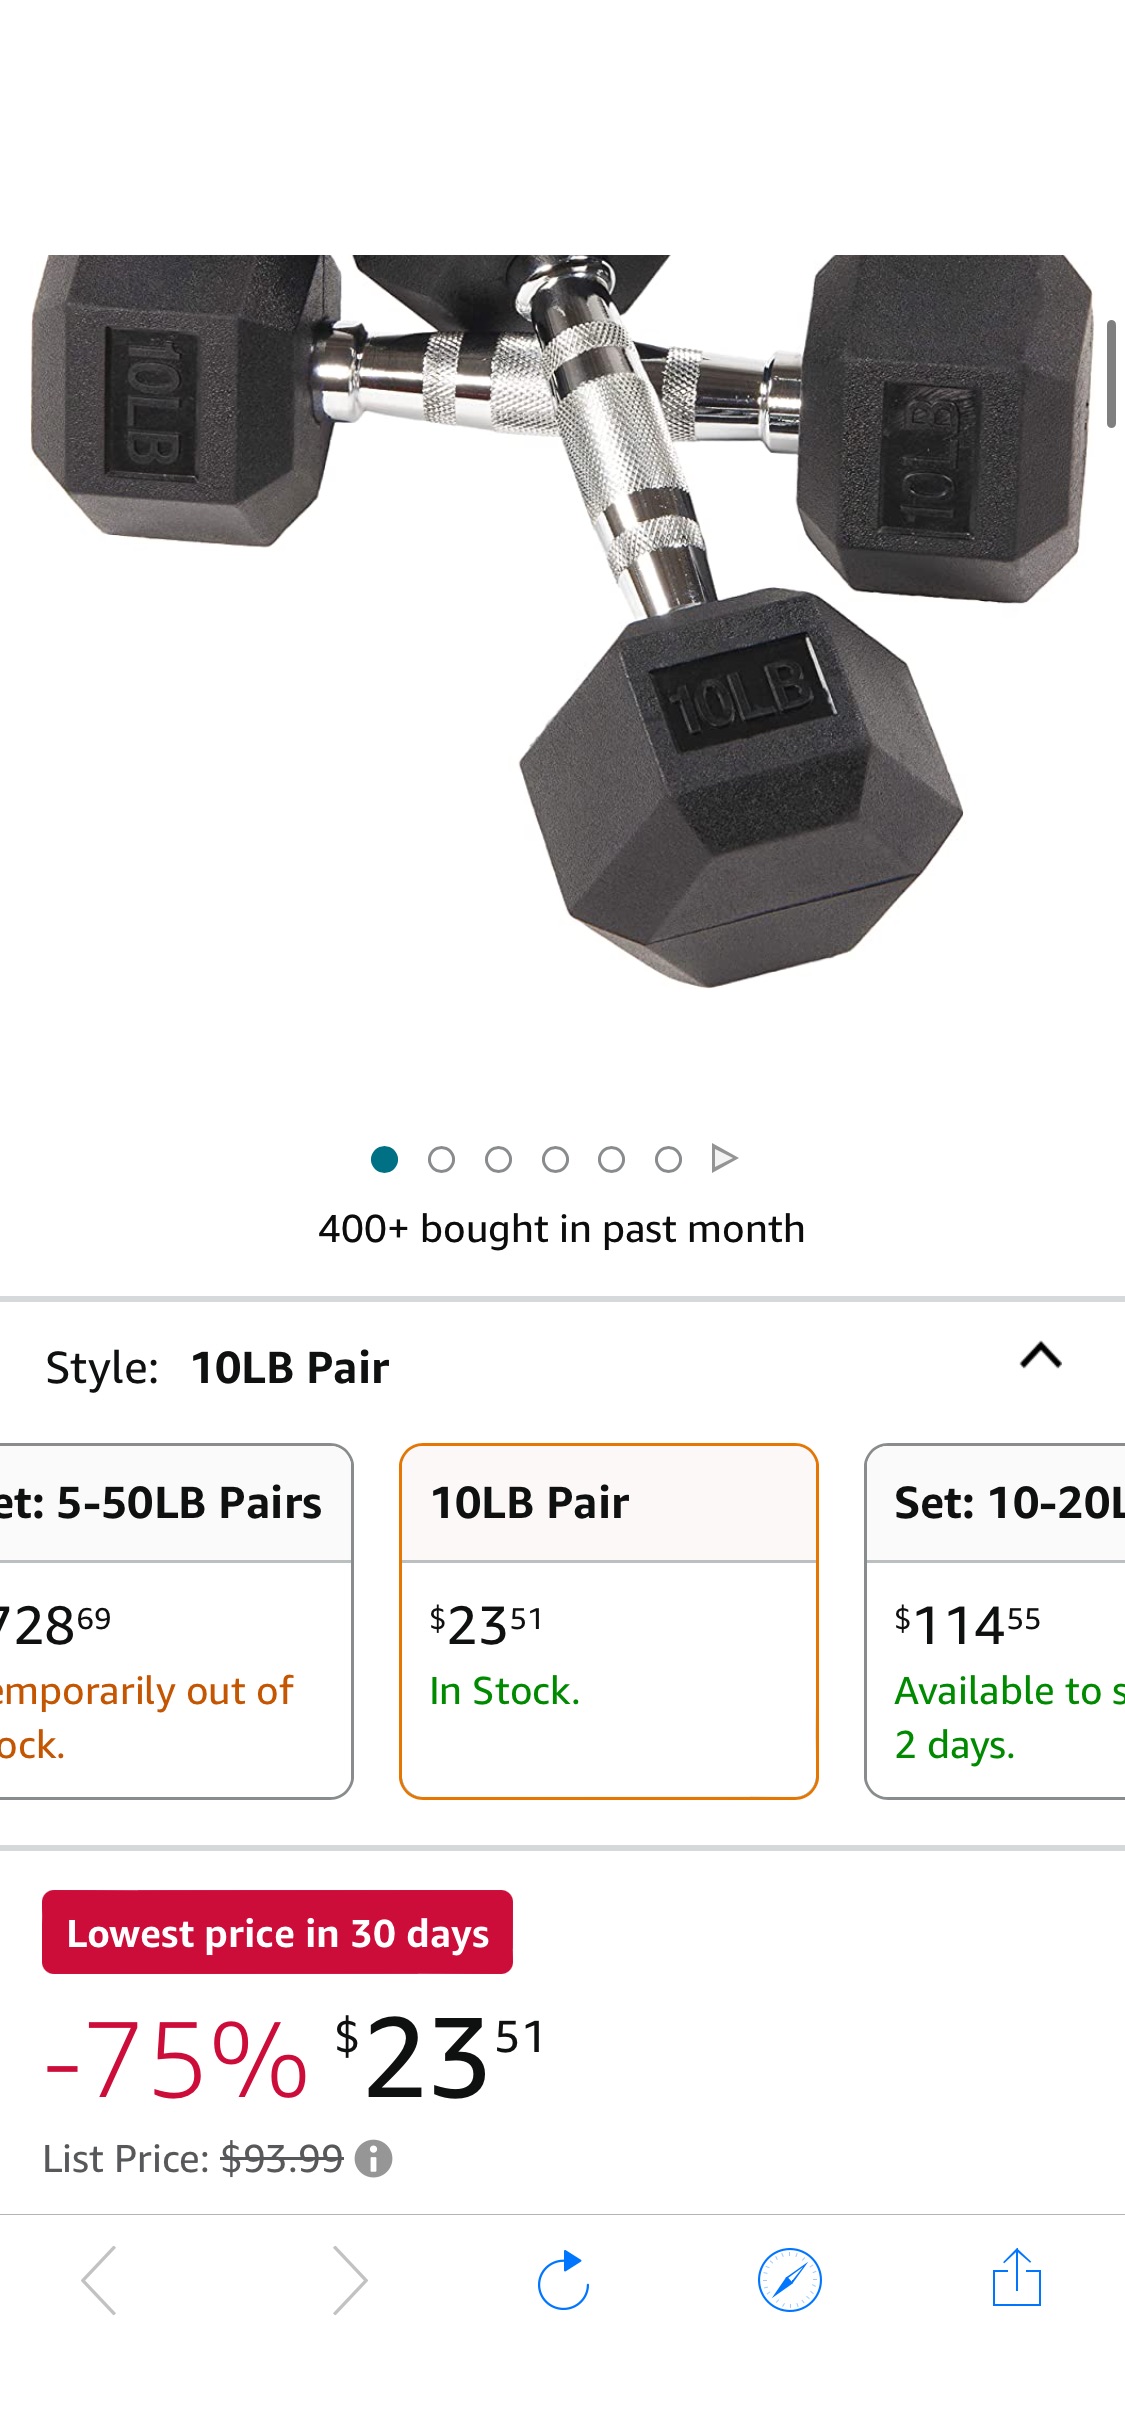 Amazon.com : Signature Fitness Rubber Encased Hex Dumbbell, 10LB Pair : Sports & Outdoors